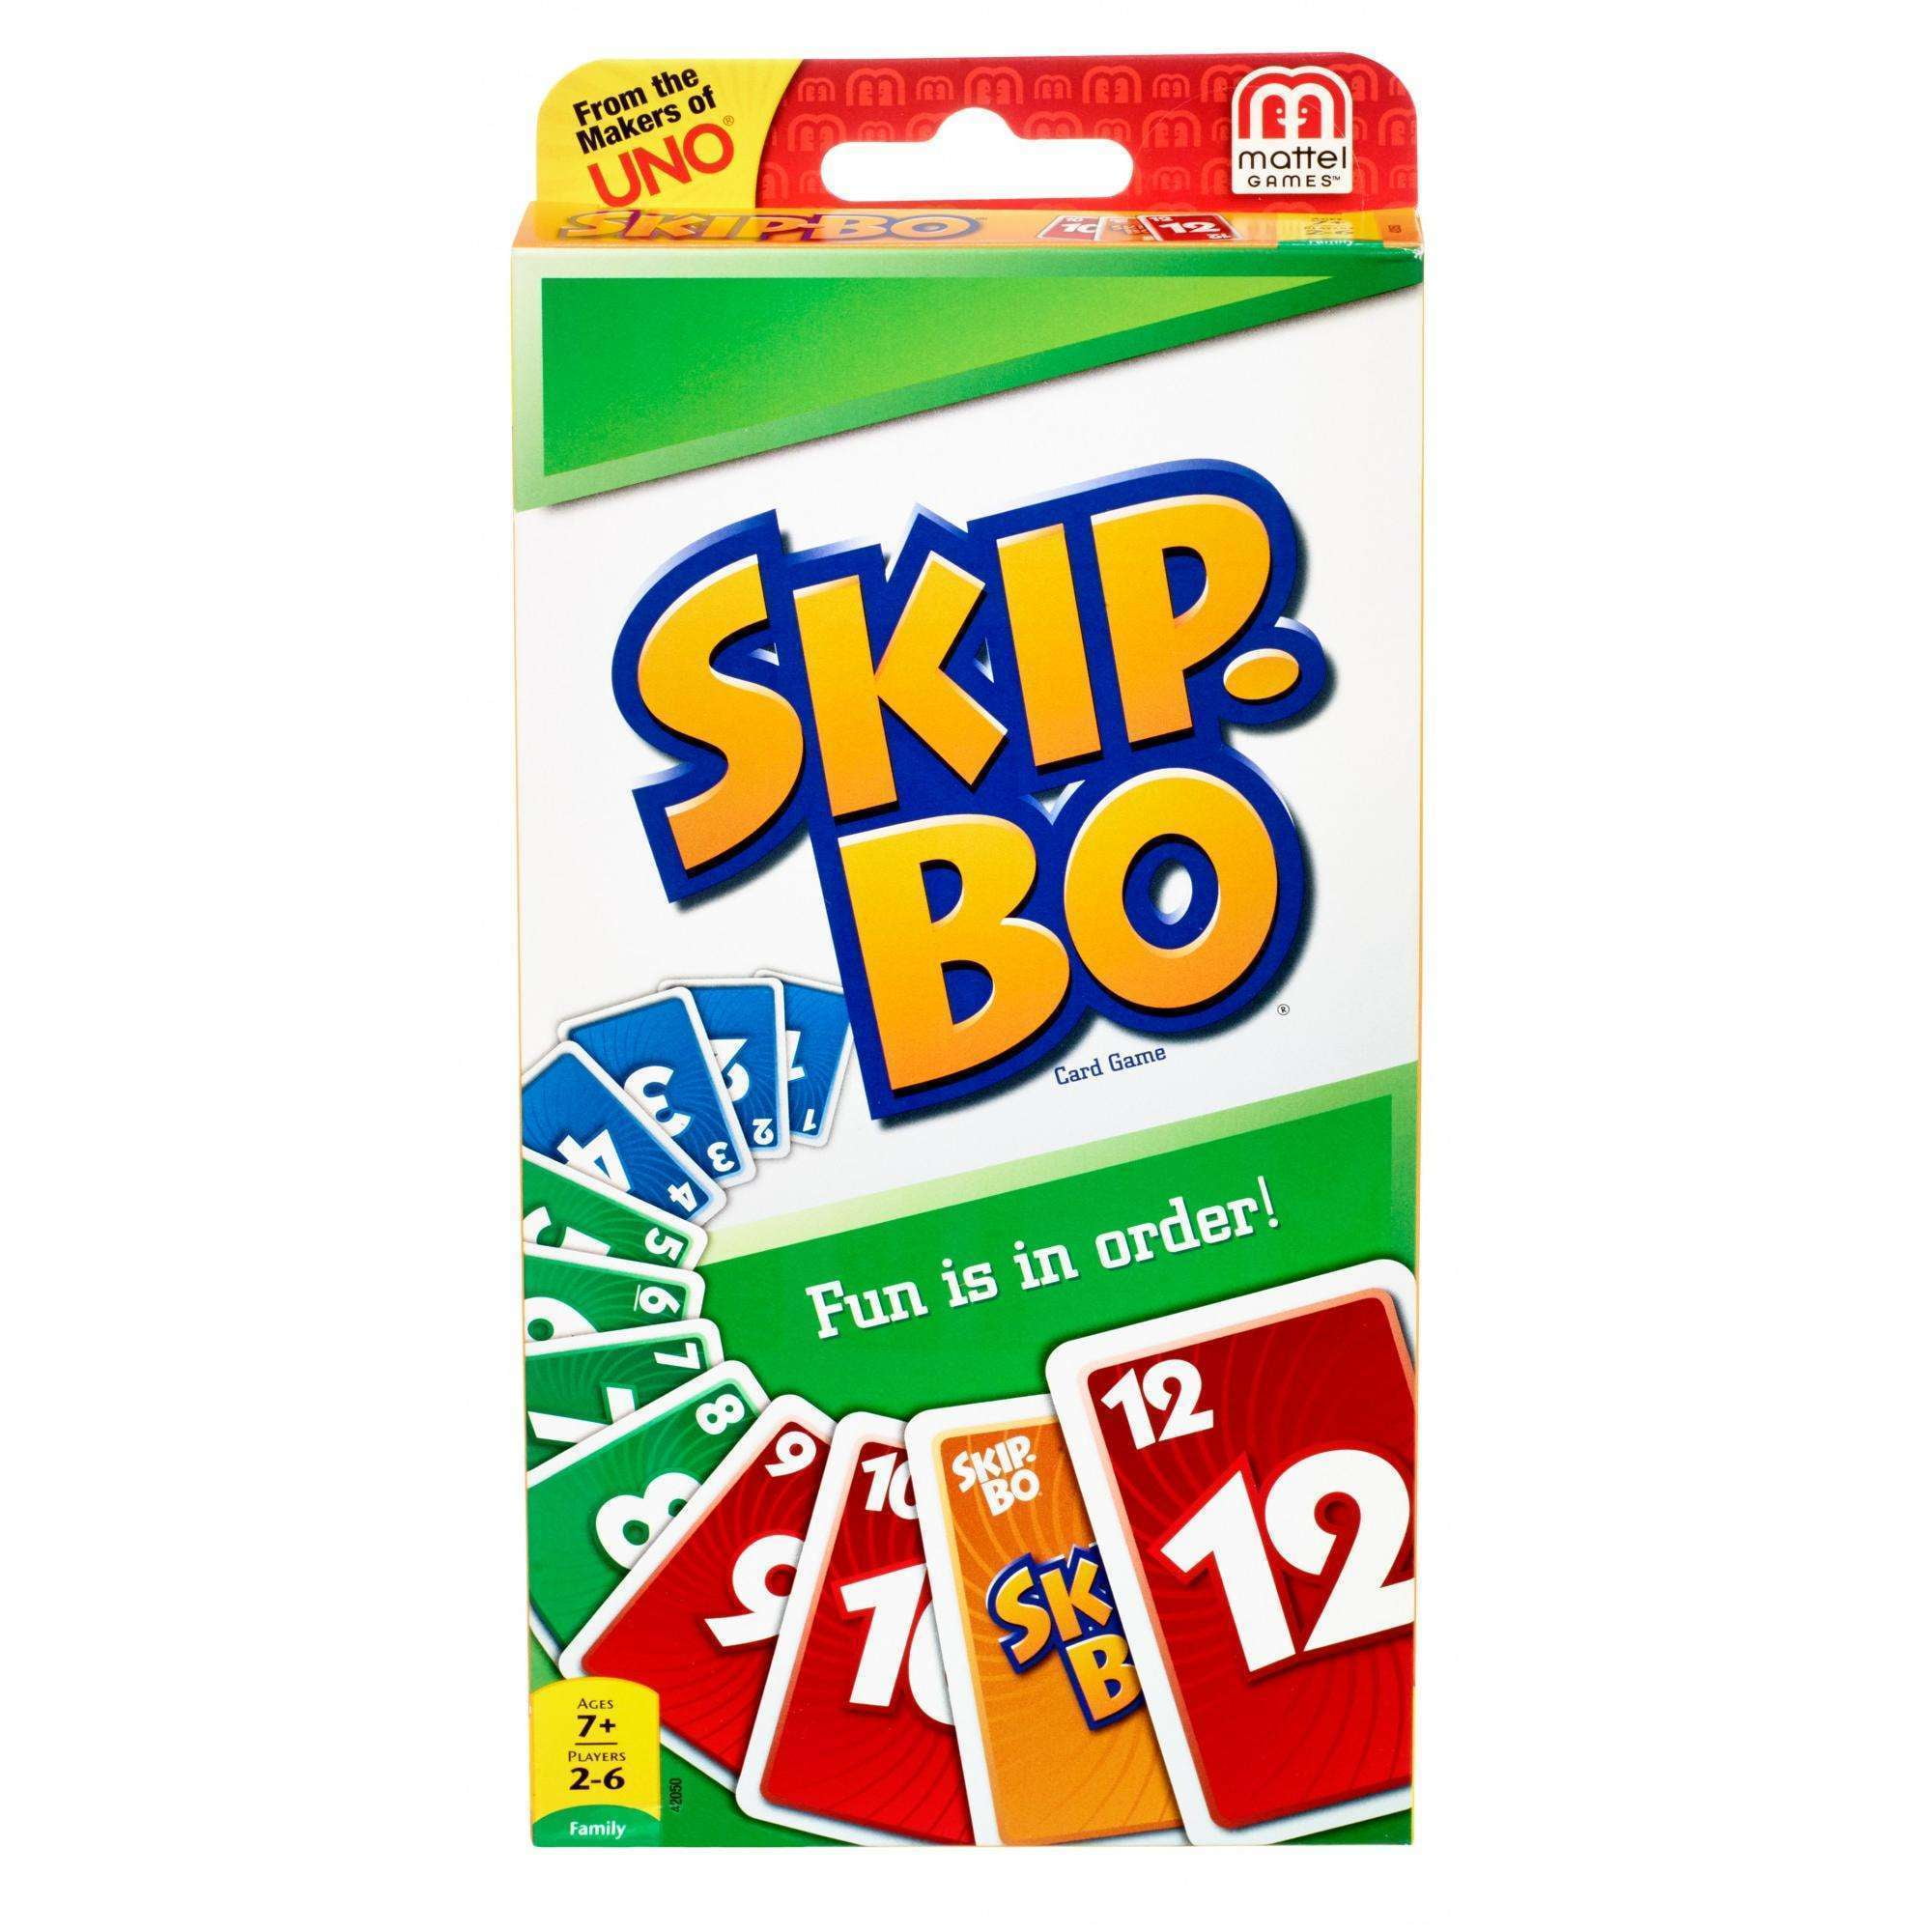 Skip-Bo Ultimate Sequencing Card Game for 2-6 Players Ages 7Y+